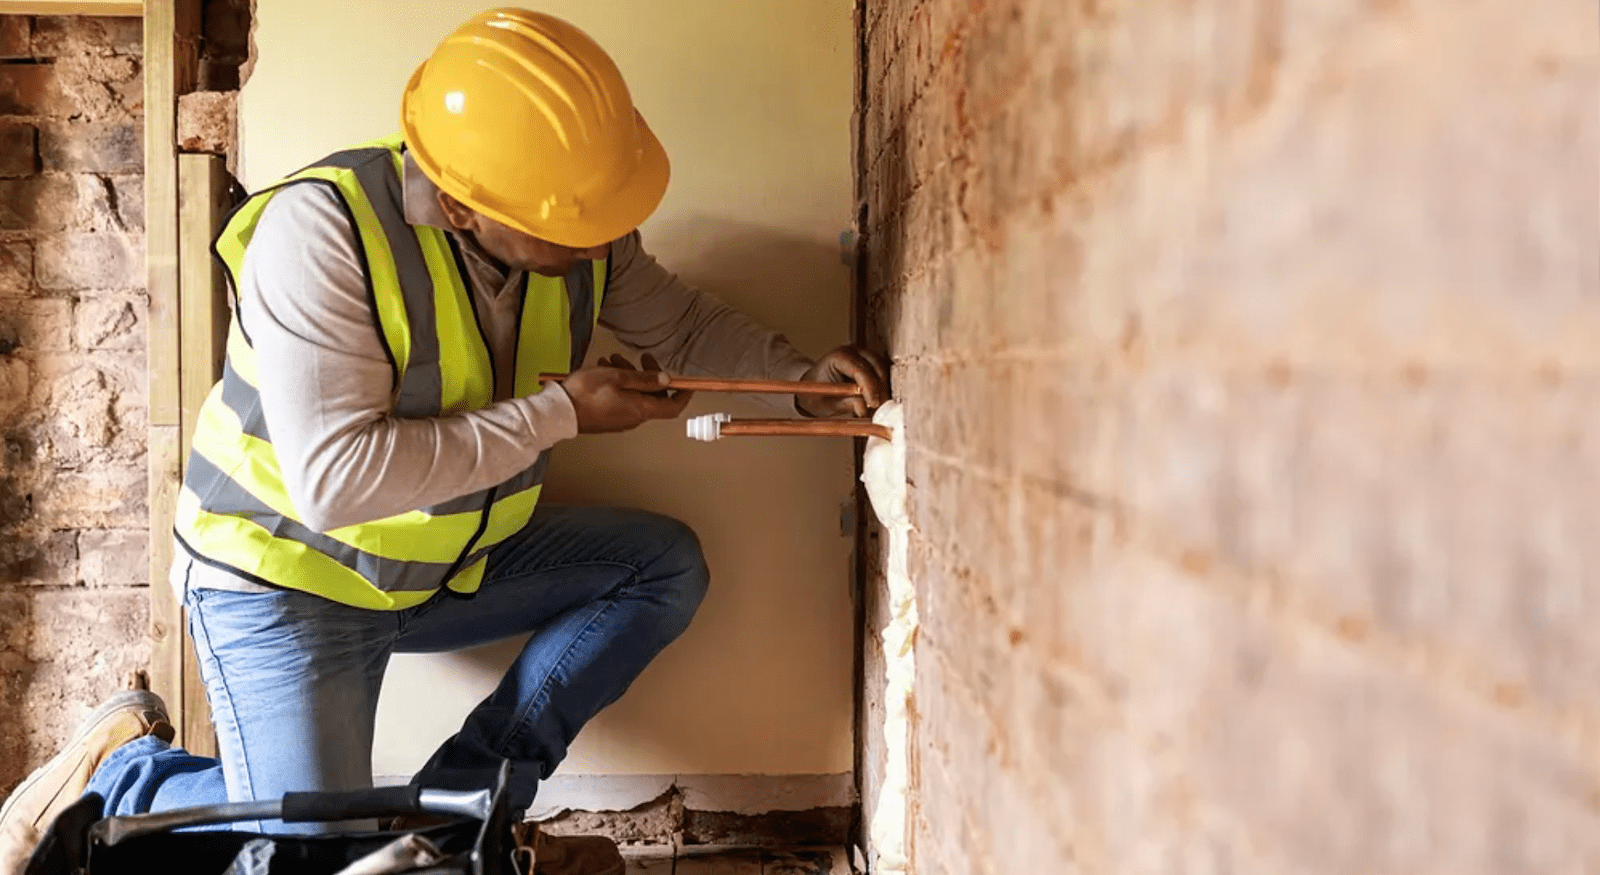 Construction worker classified as independent contractor fitting copper pipe in wall